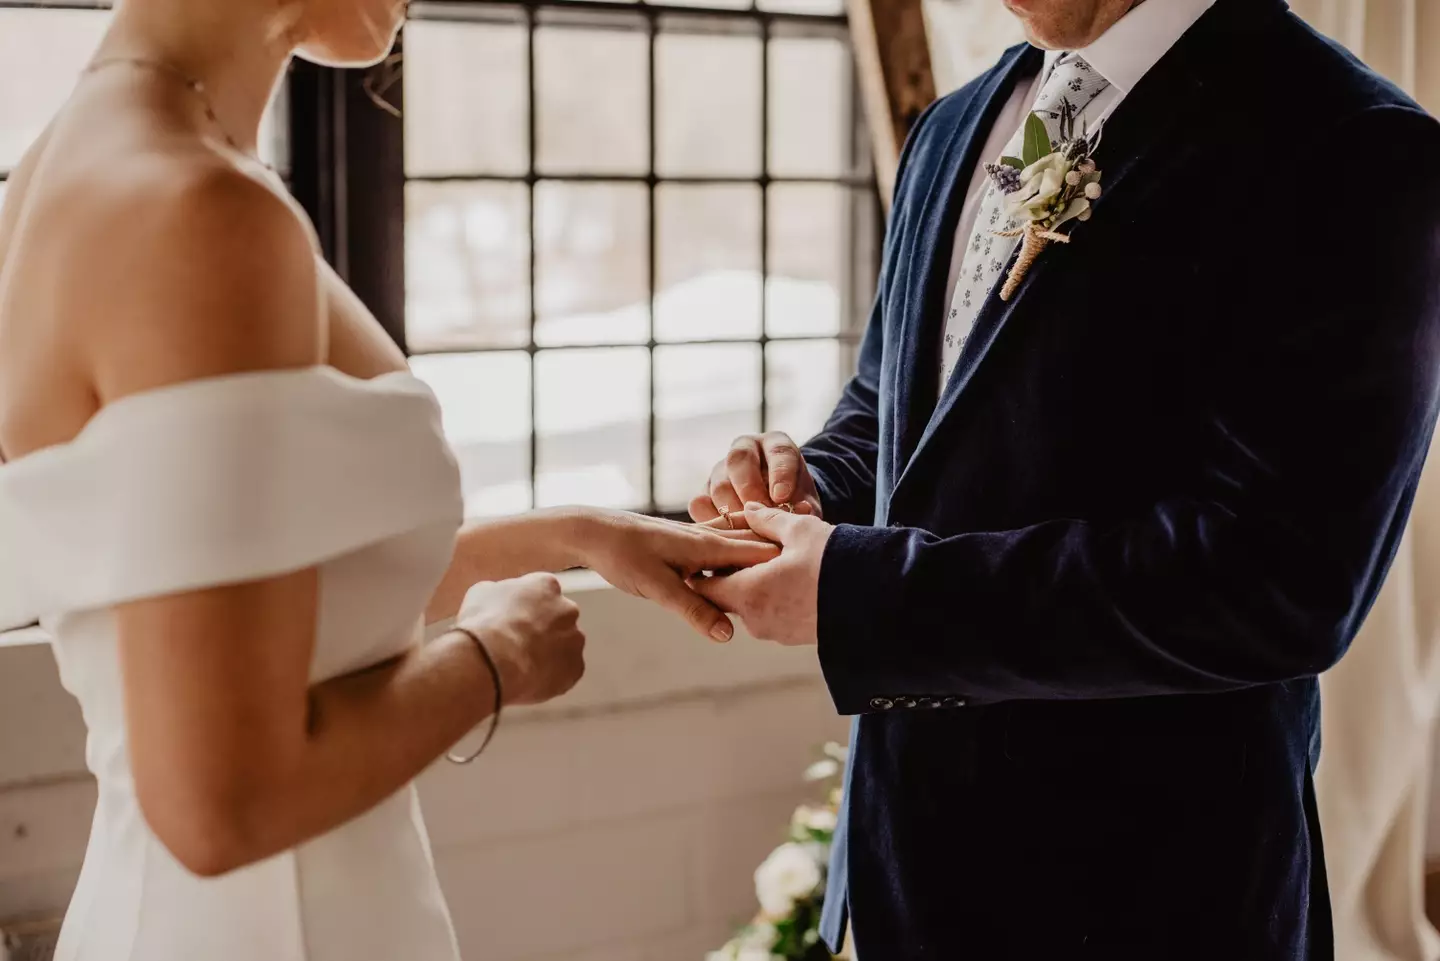 Most people hope their vows will last a lifetime but that’s not always the case.